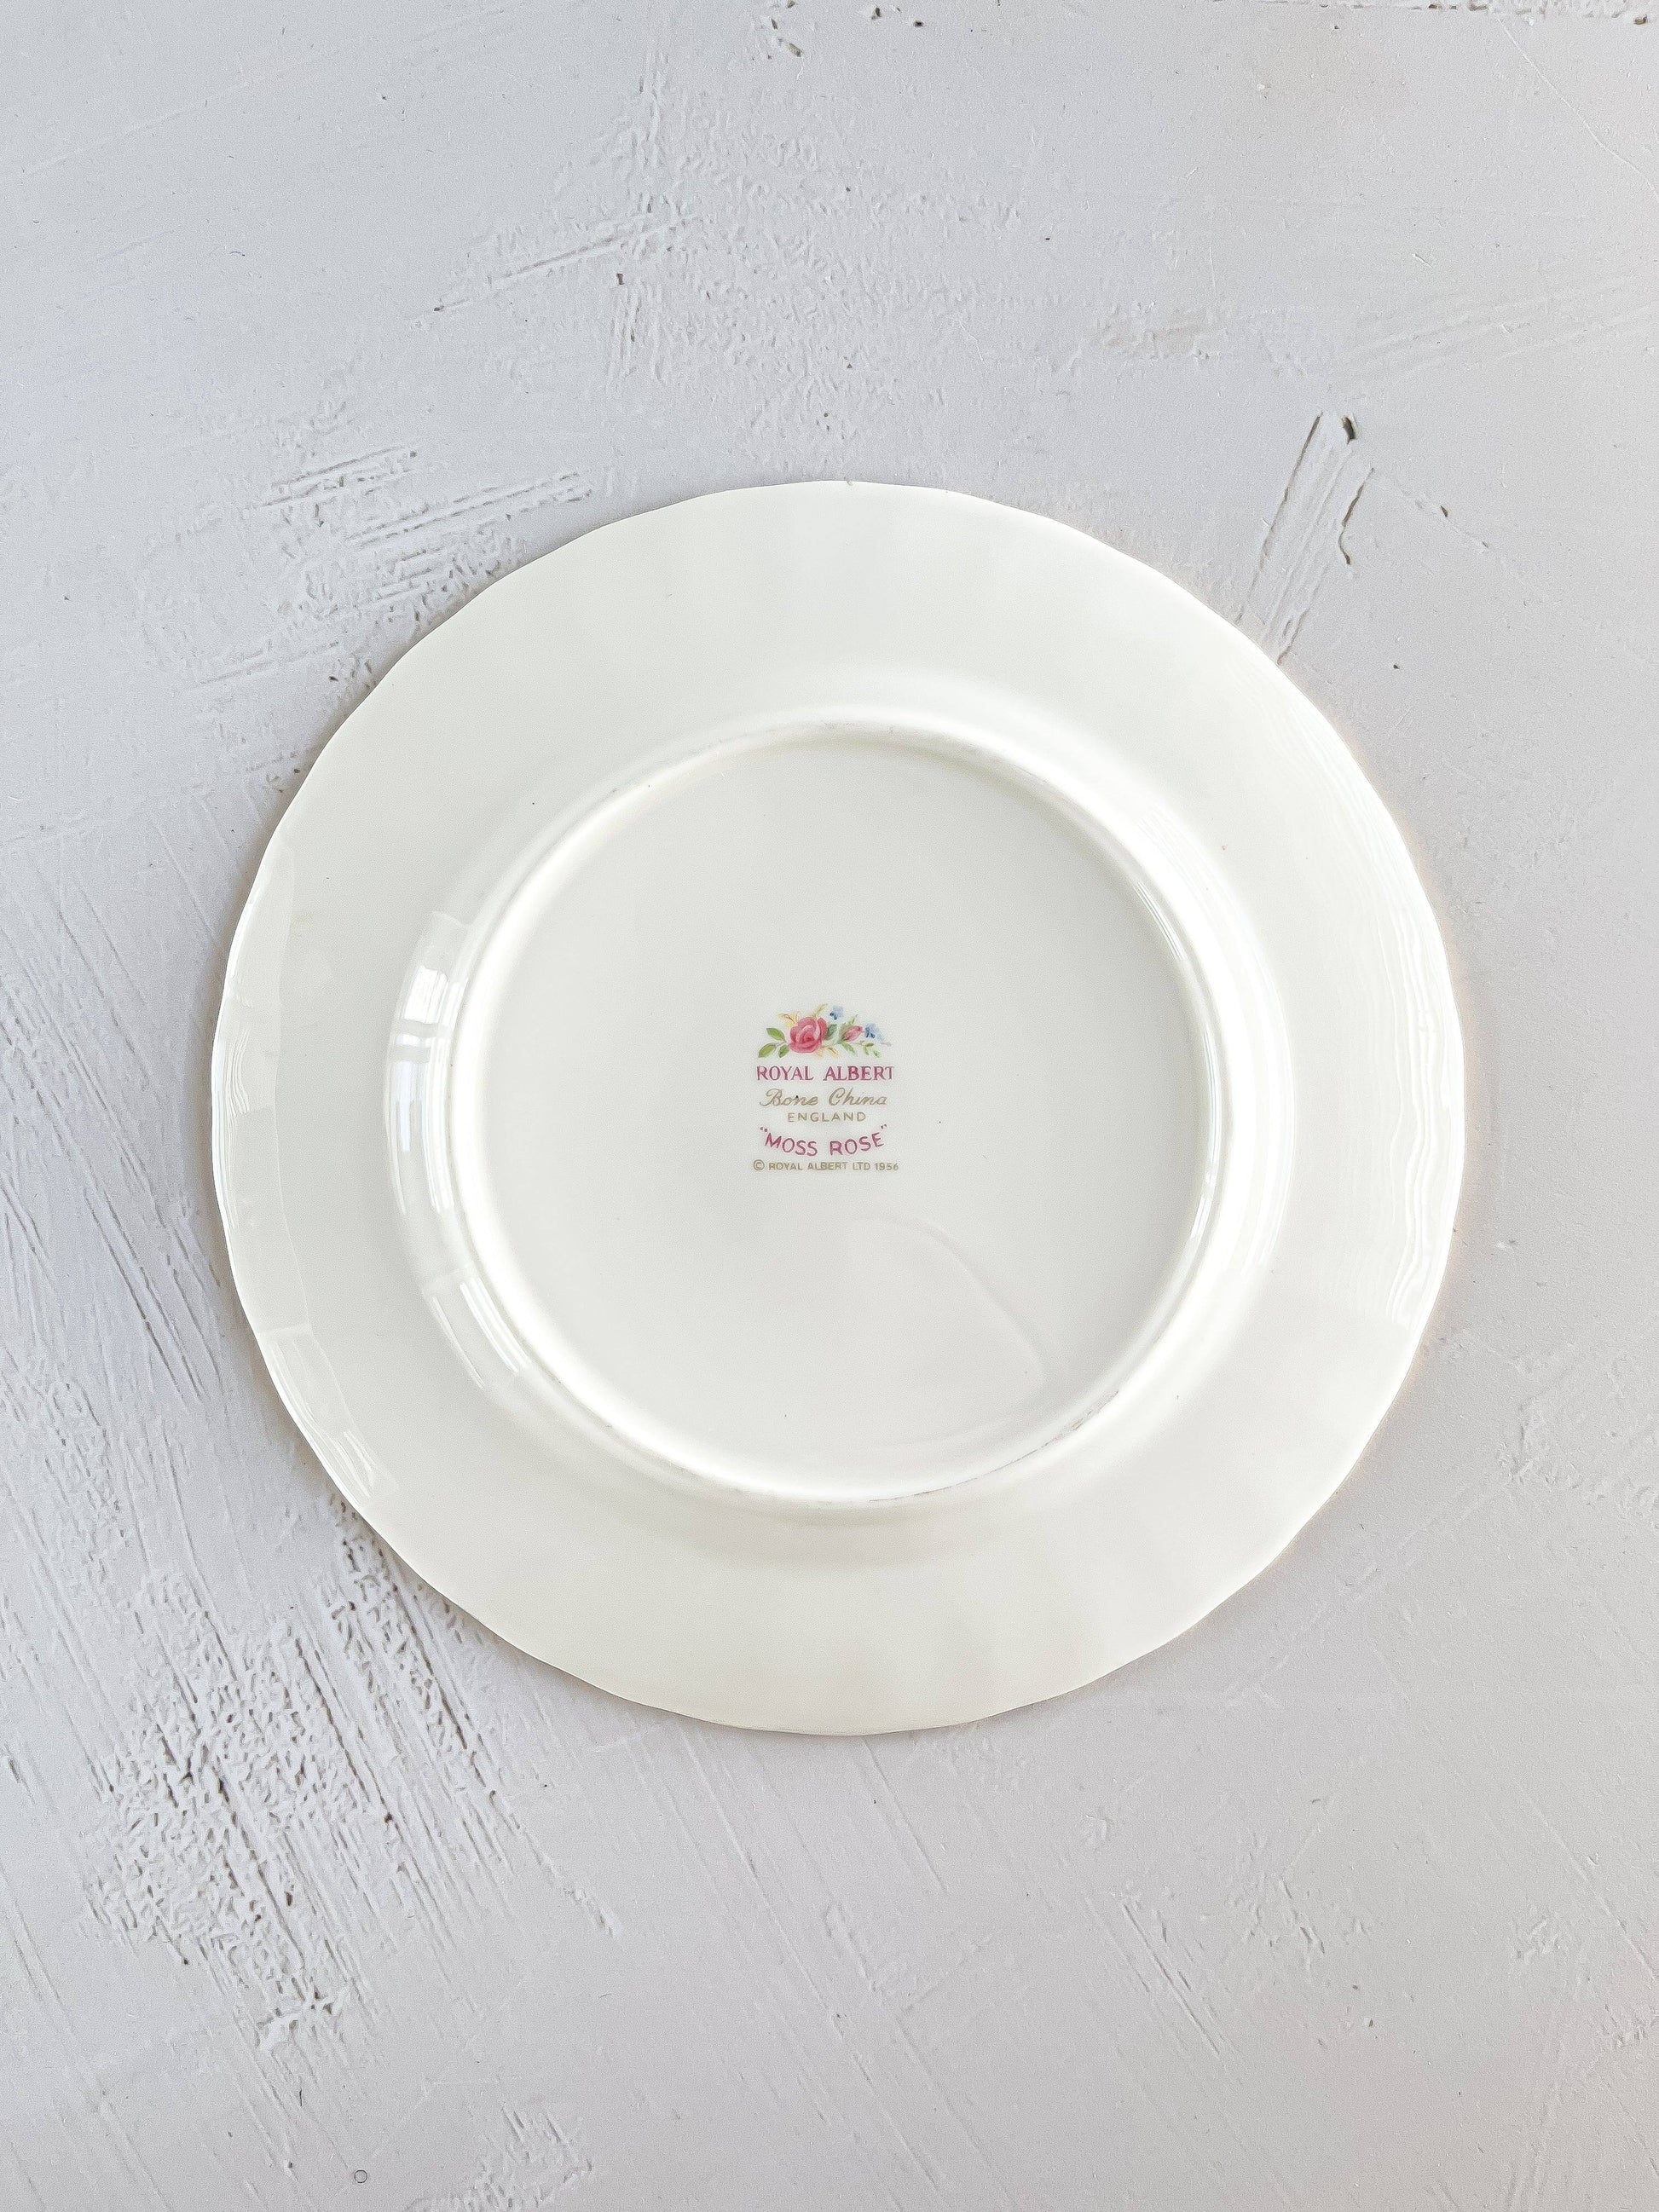 Royal Albert Bread & Butter Plate - 'Moss Rose' Collection - SOSC Home